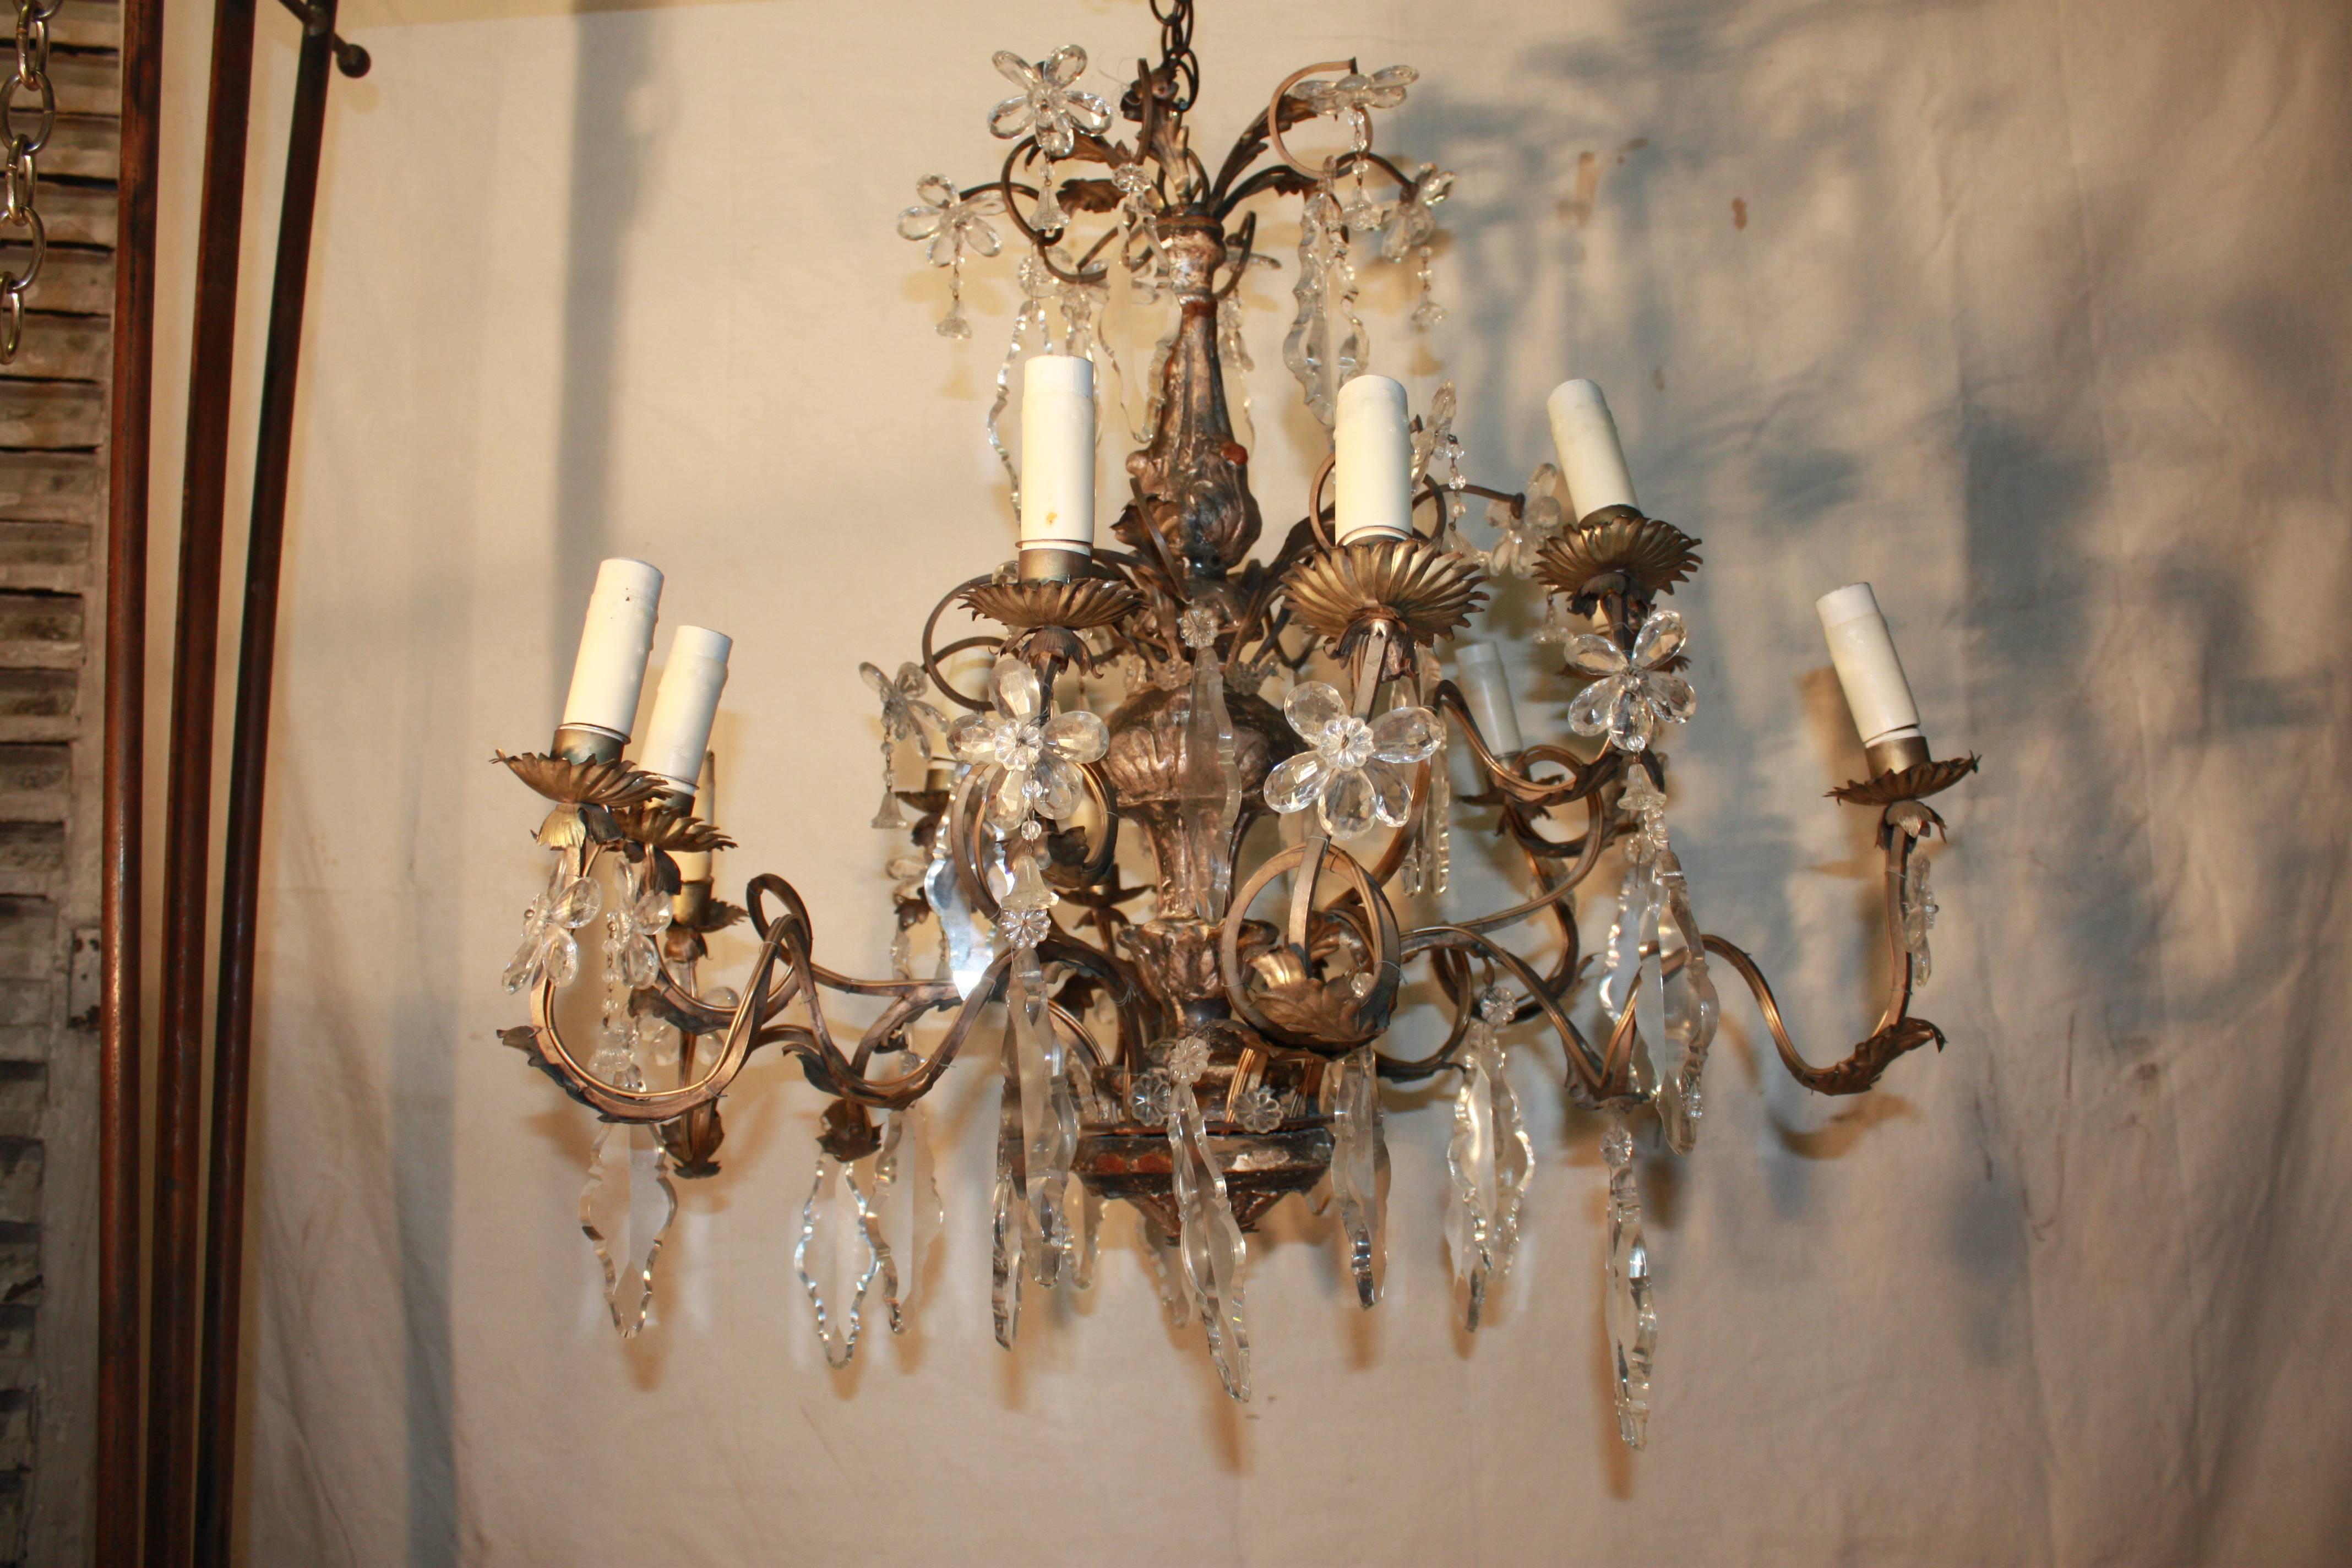 18th century Italian silver giltwood chandelier, ornate with crystal tassels.